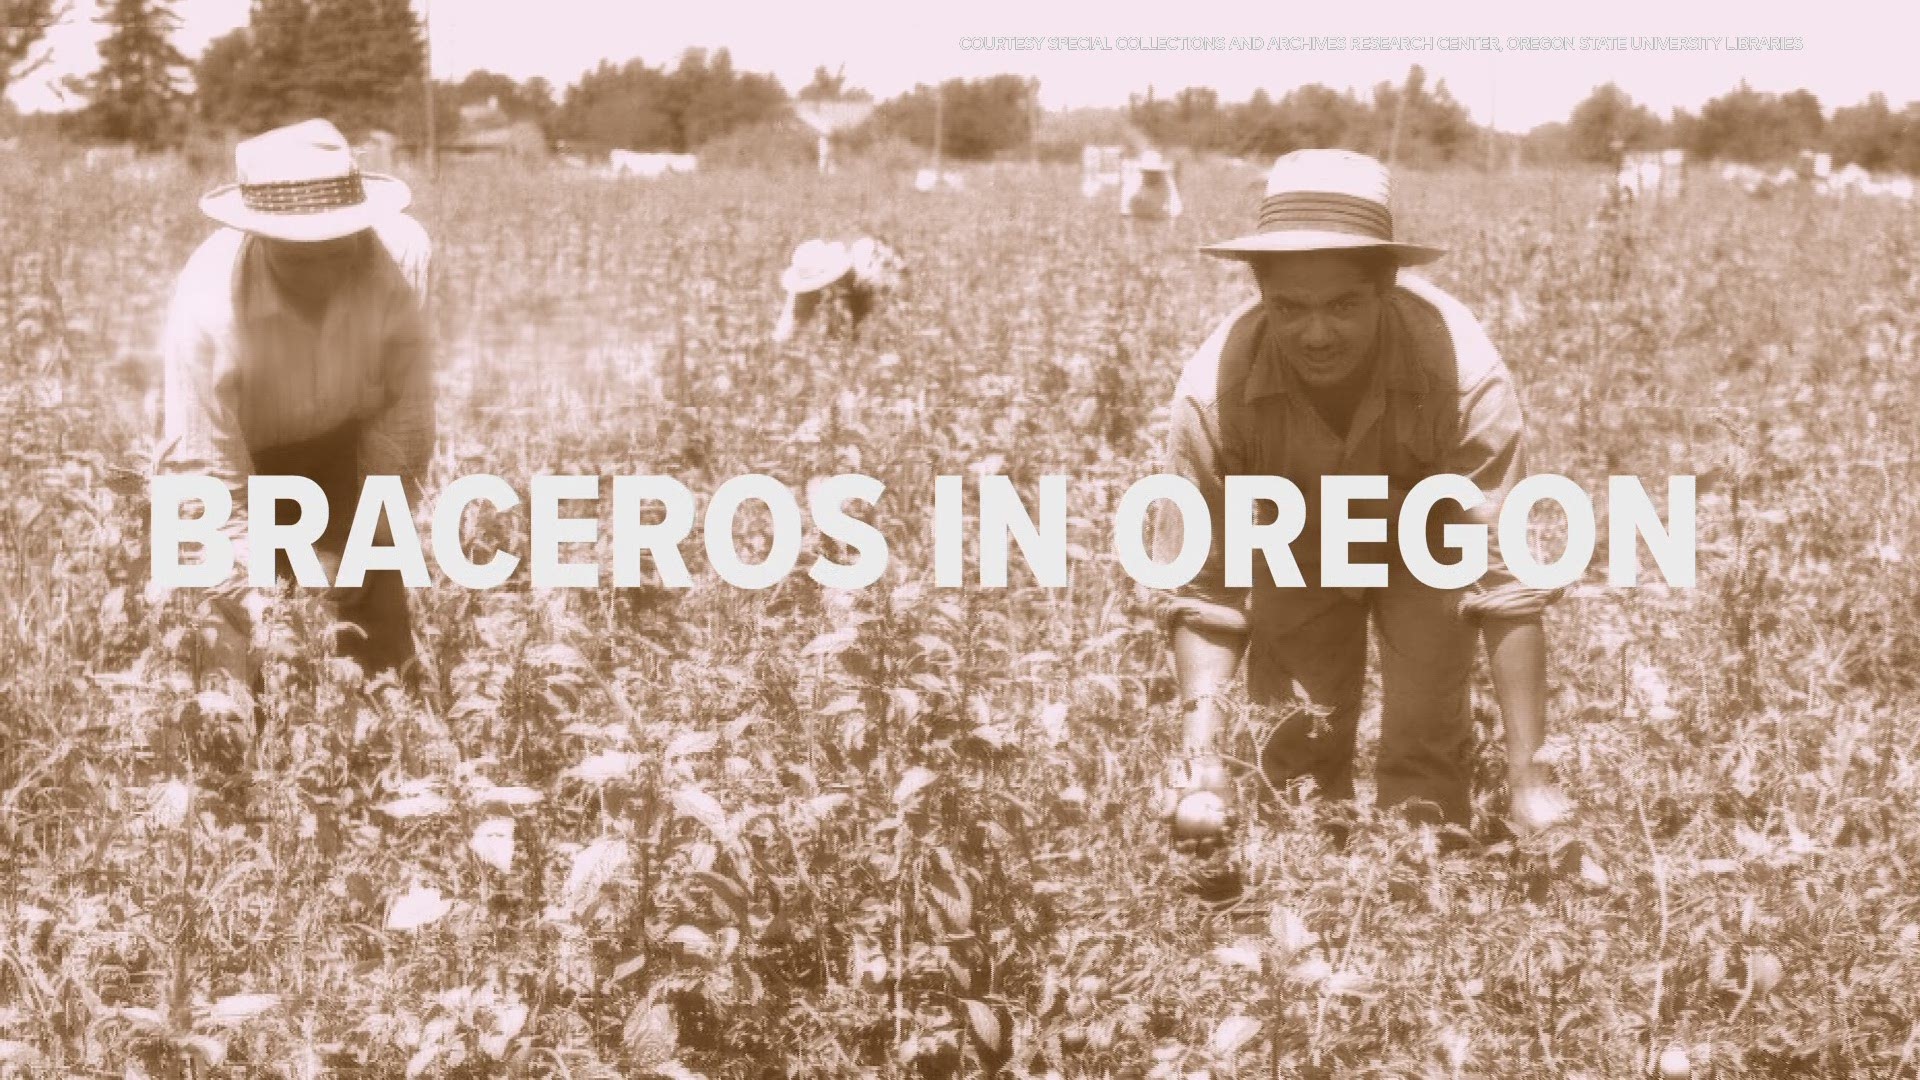 In 1942, a joint agreement between the U.S. and Mexico brought thousands of Mexican laborers to work on farms around the United States. They were known as braceros.